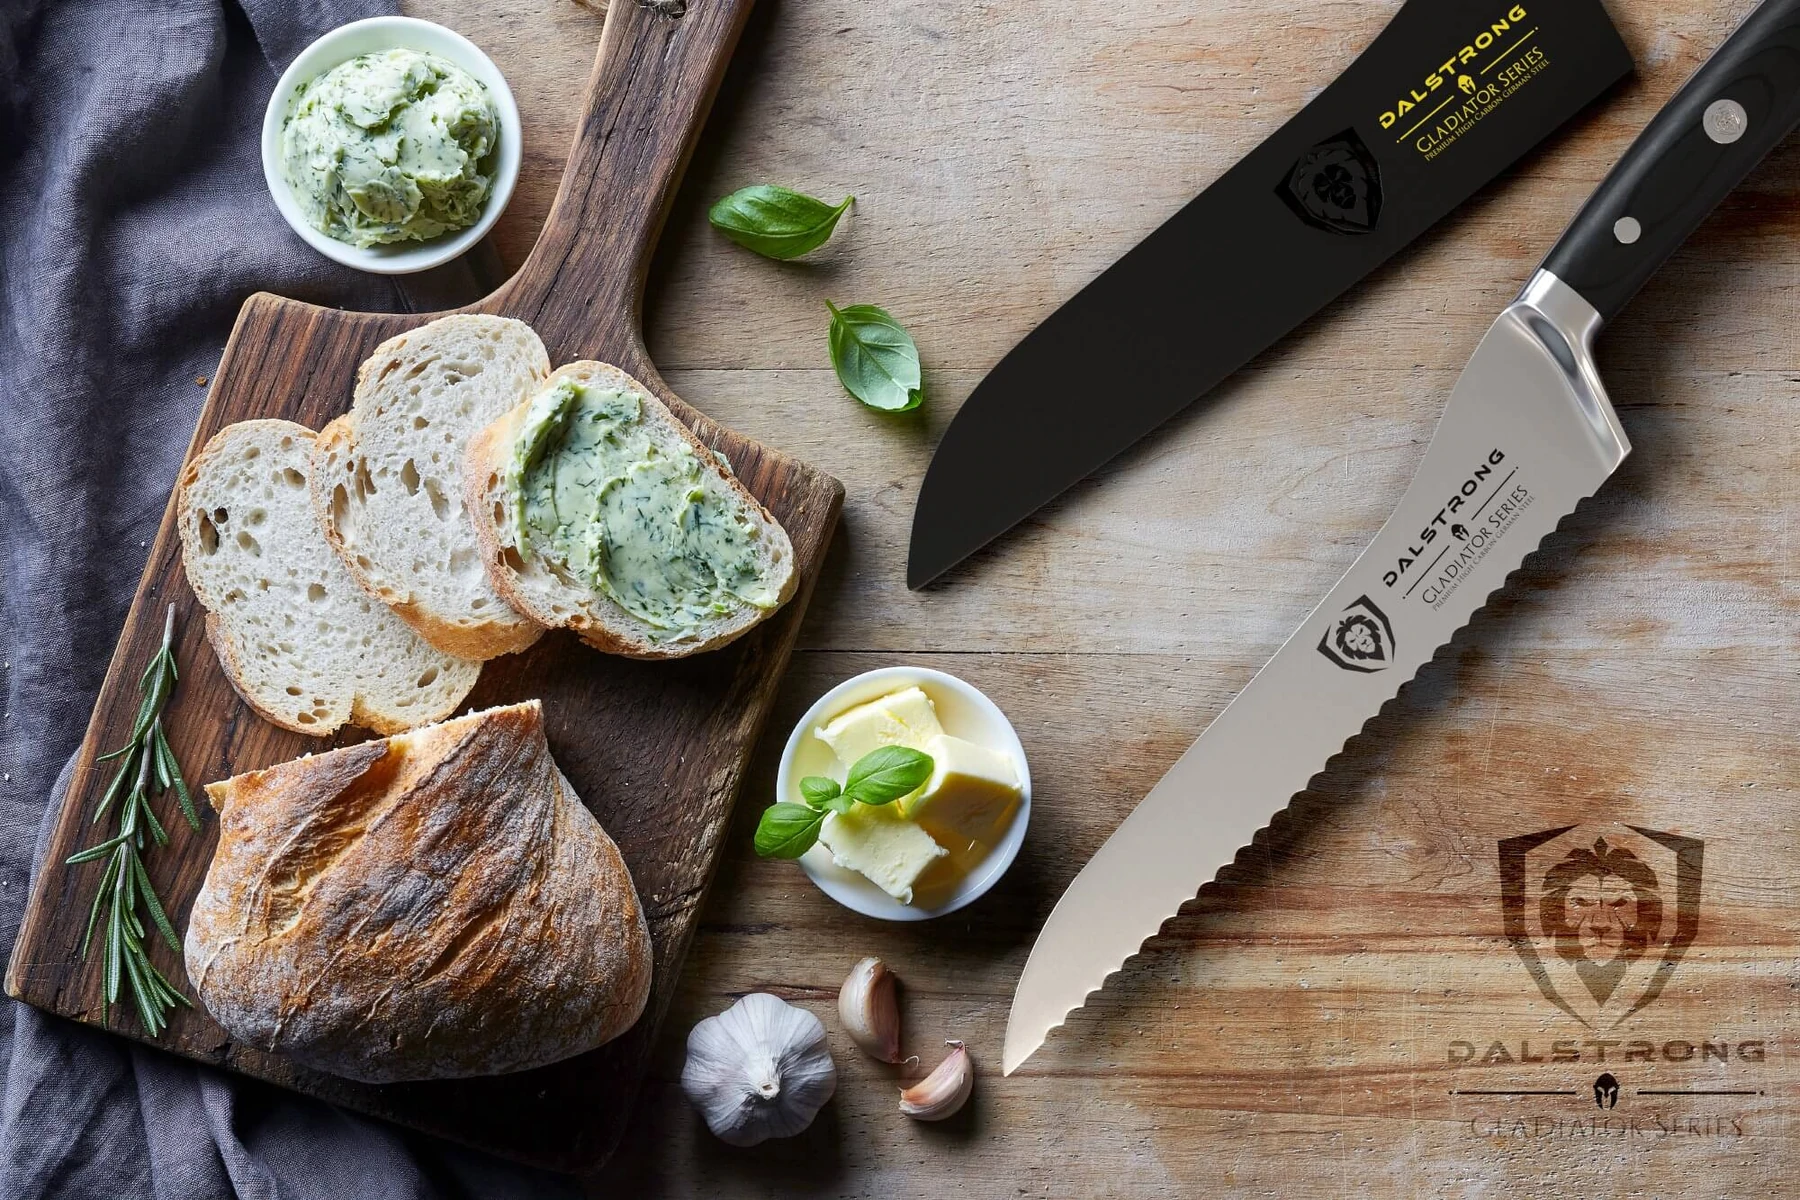 A Home Bread Knife 14.5 Inch & Bread Slicer, Compact Bread Cutting Guide  With Crumb Tray